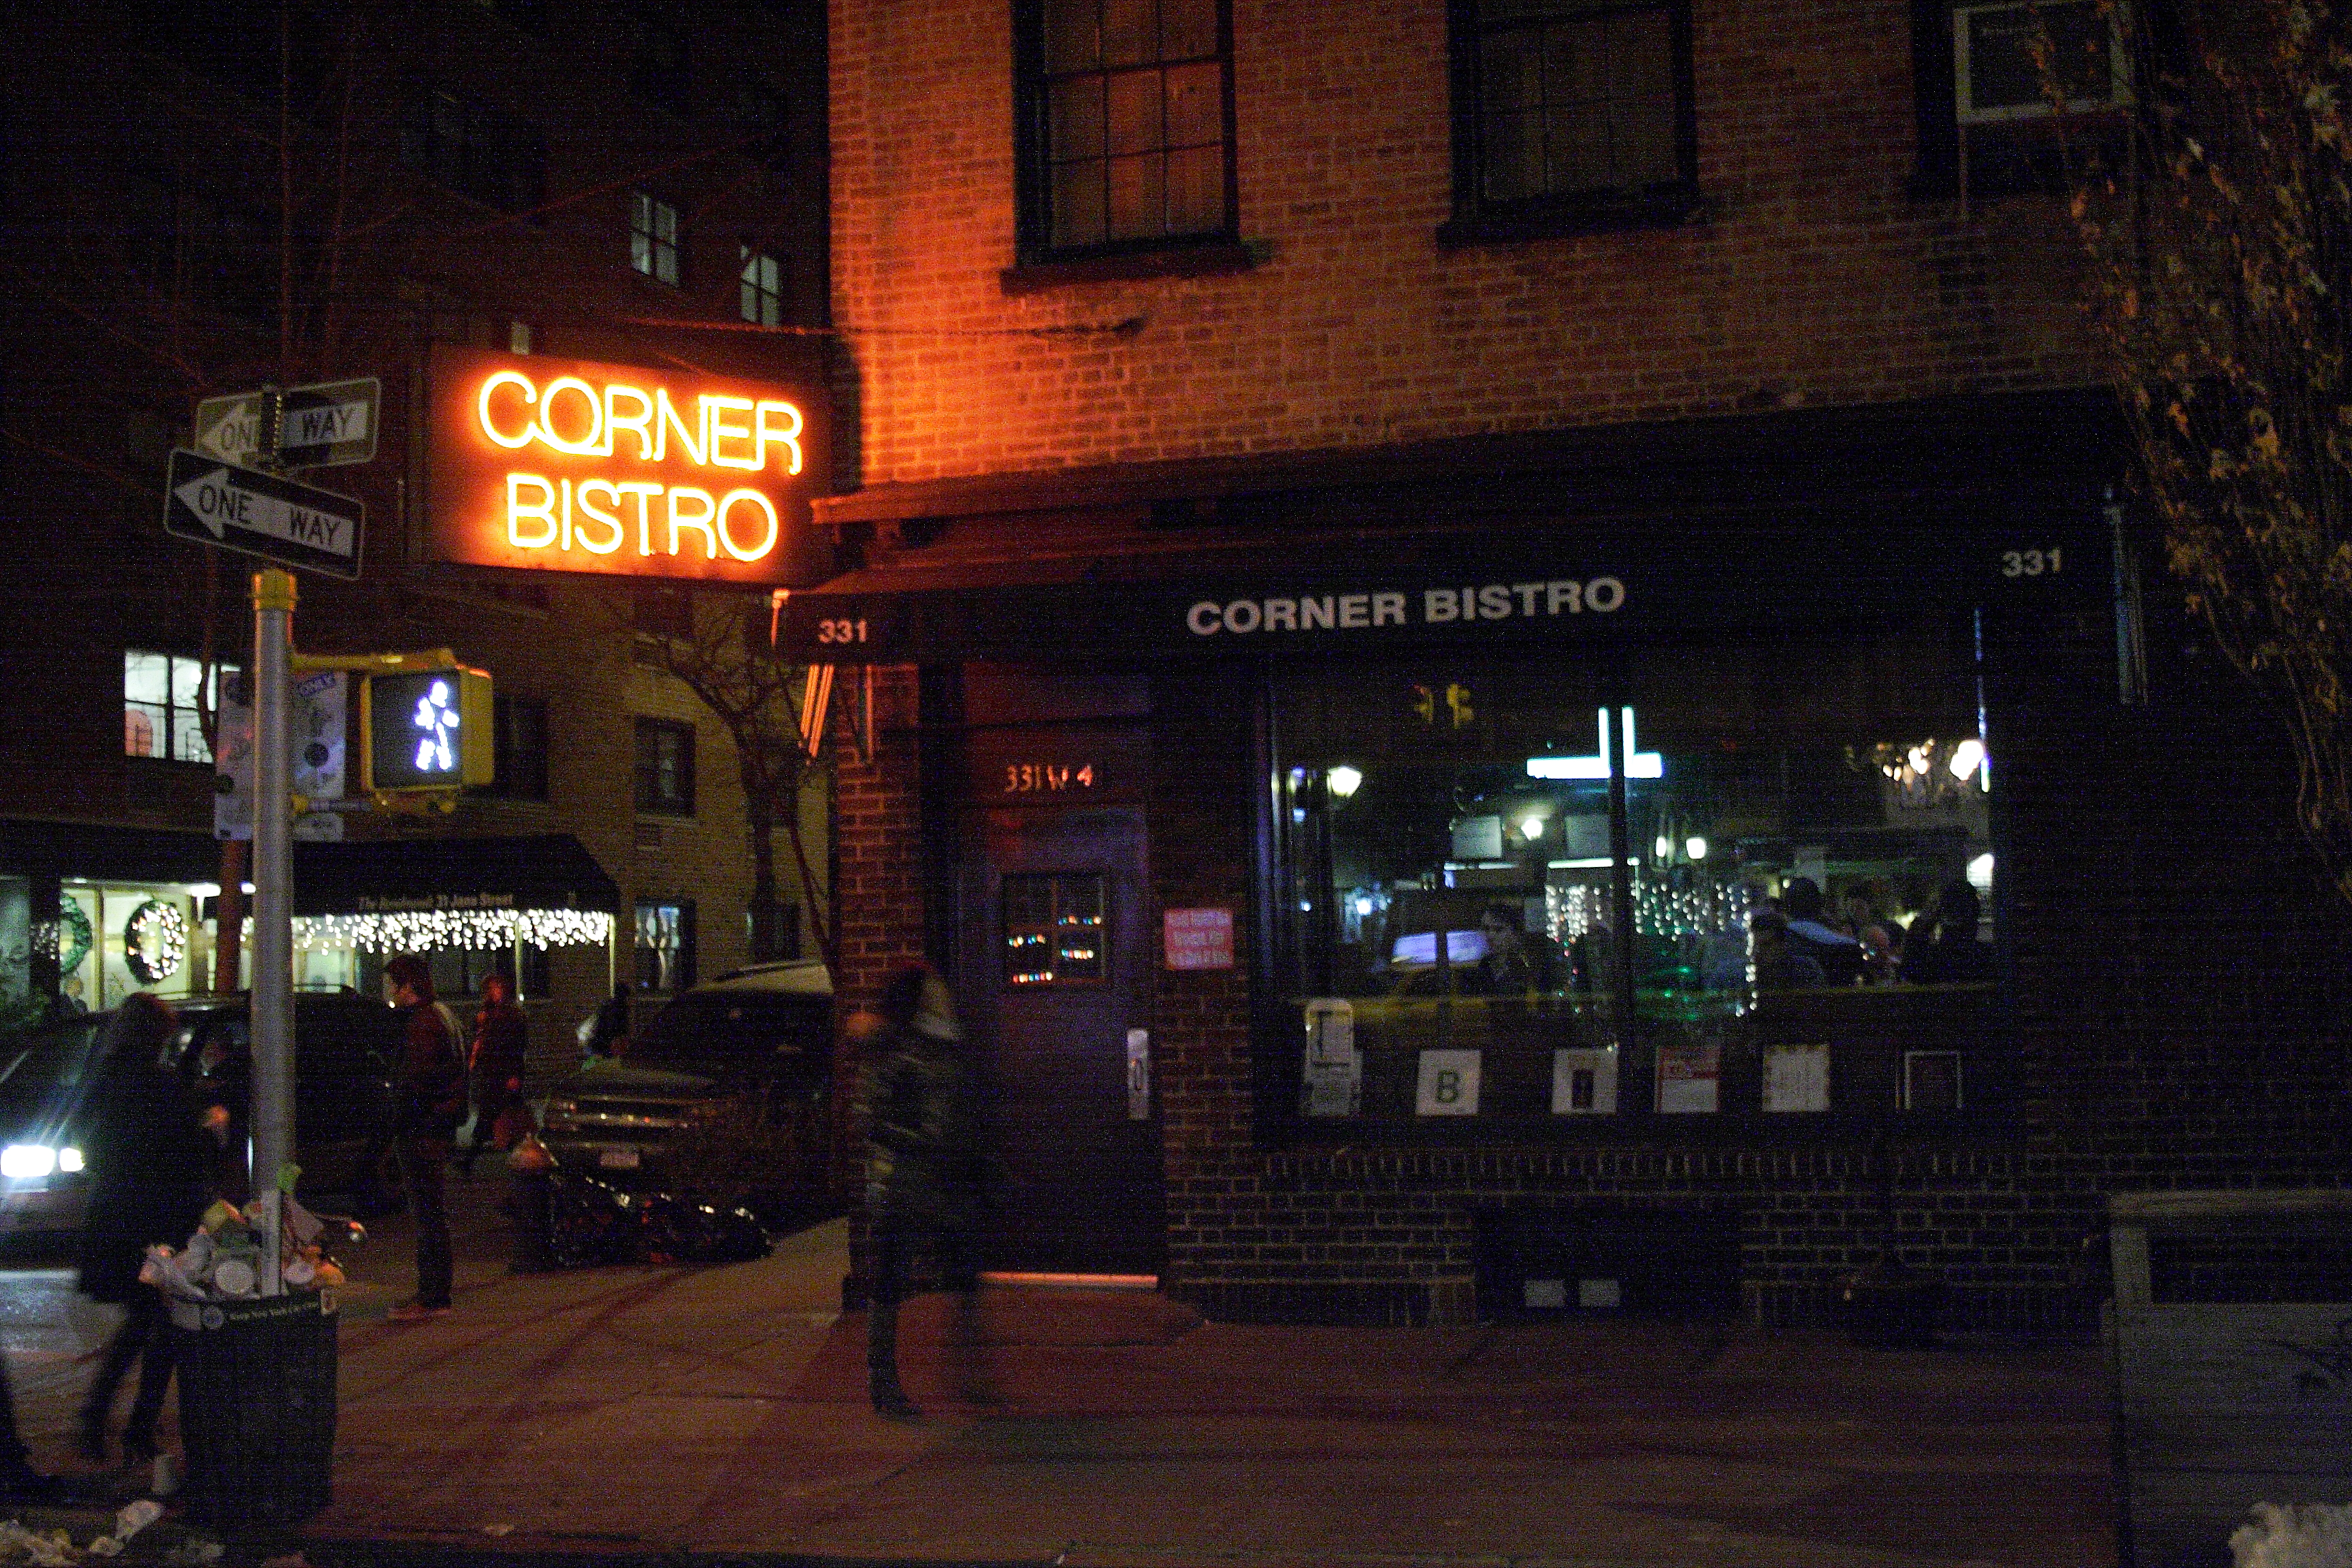 A neon sign harkens the entrance to Corner Bistro